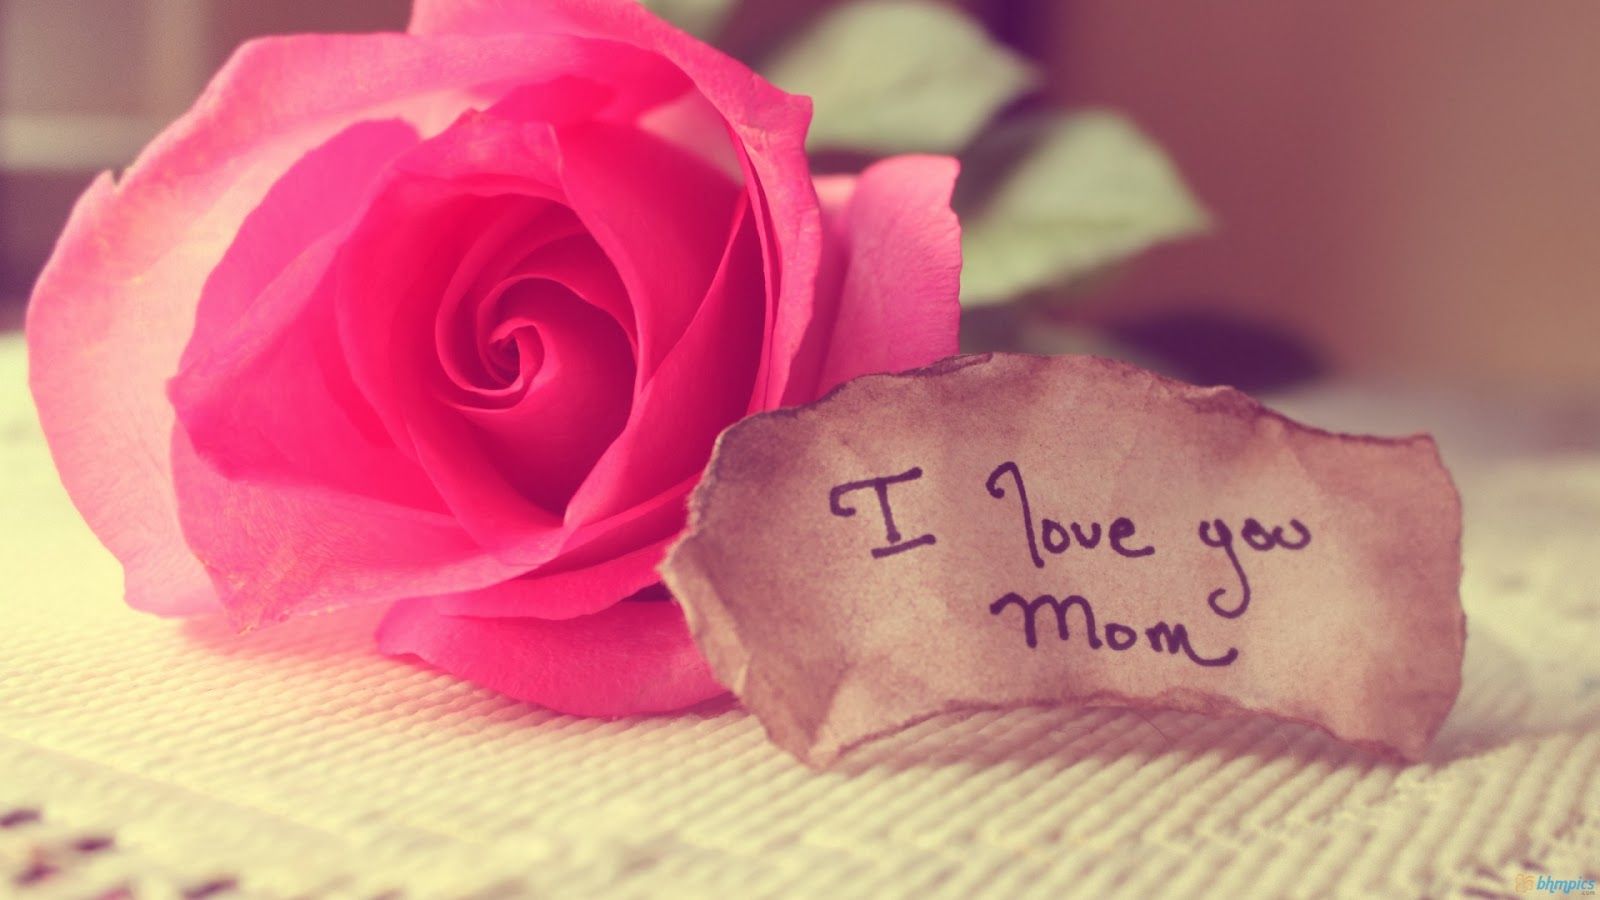 love, Mother's Day I Love You Mom Exclusive HD Wallpaper 2014